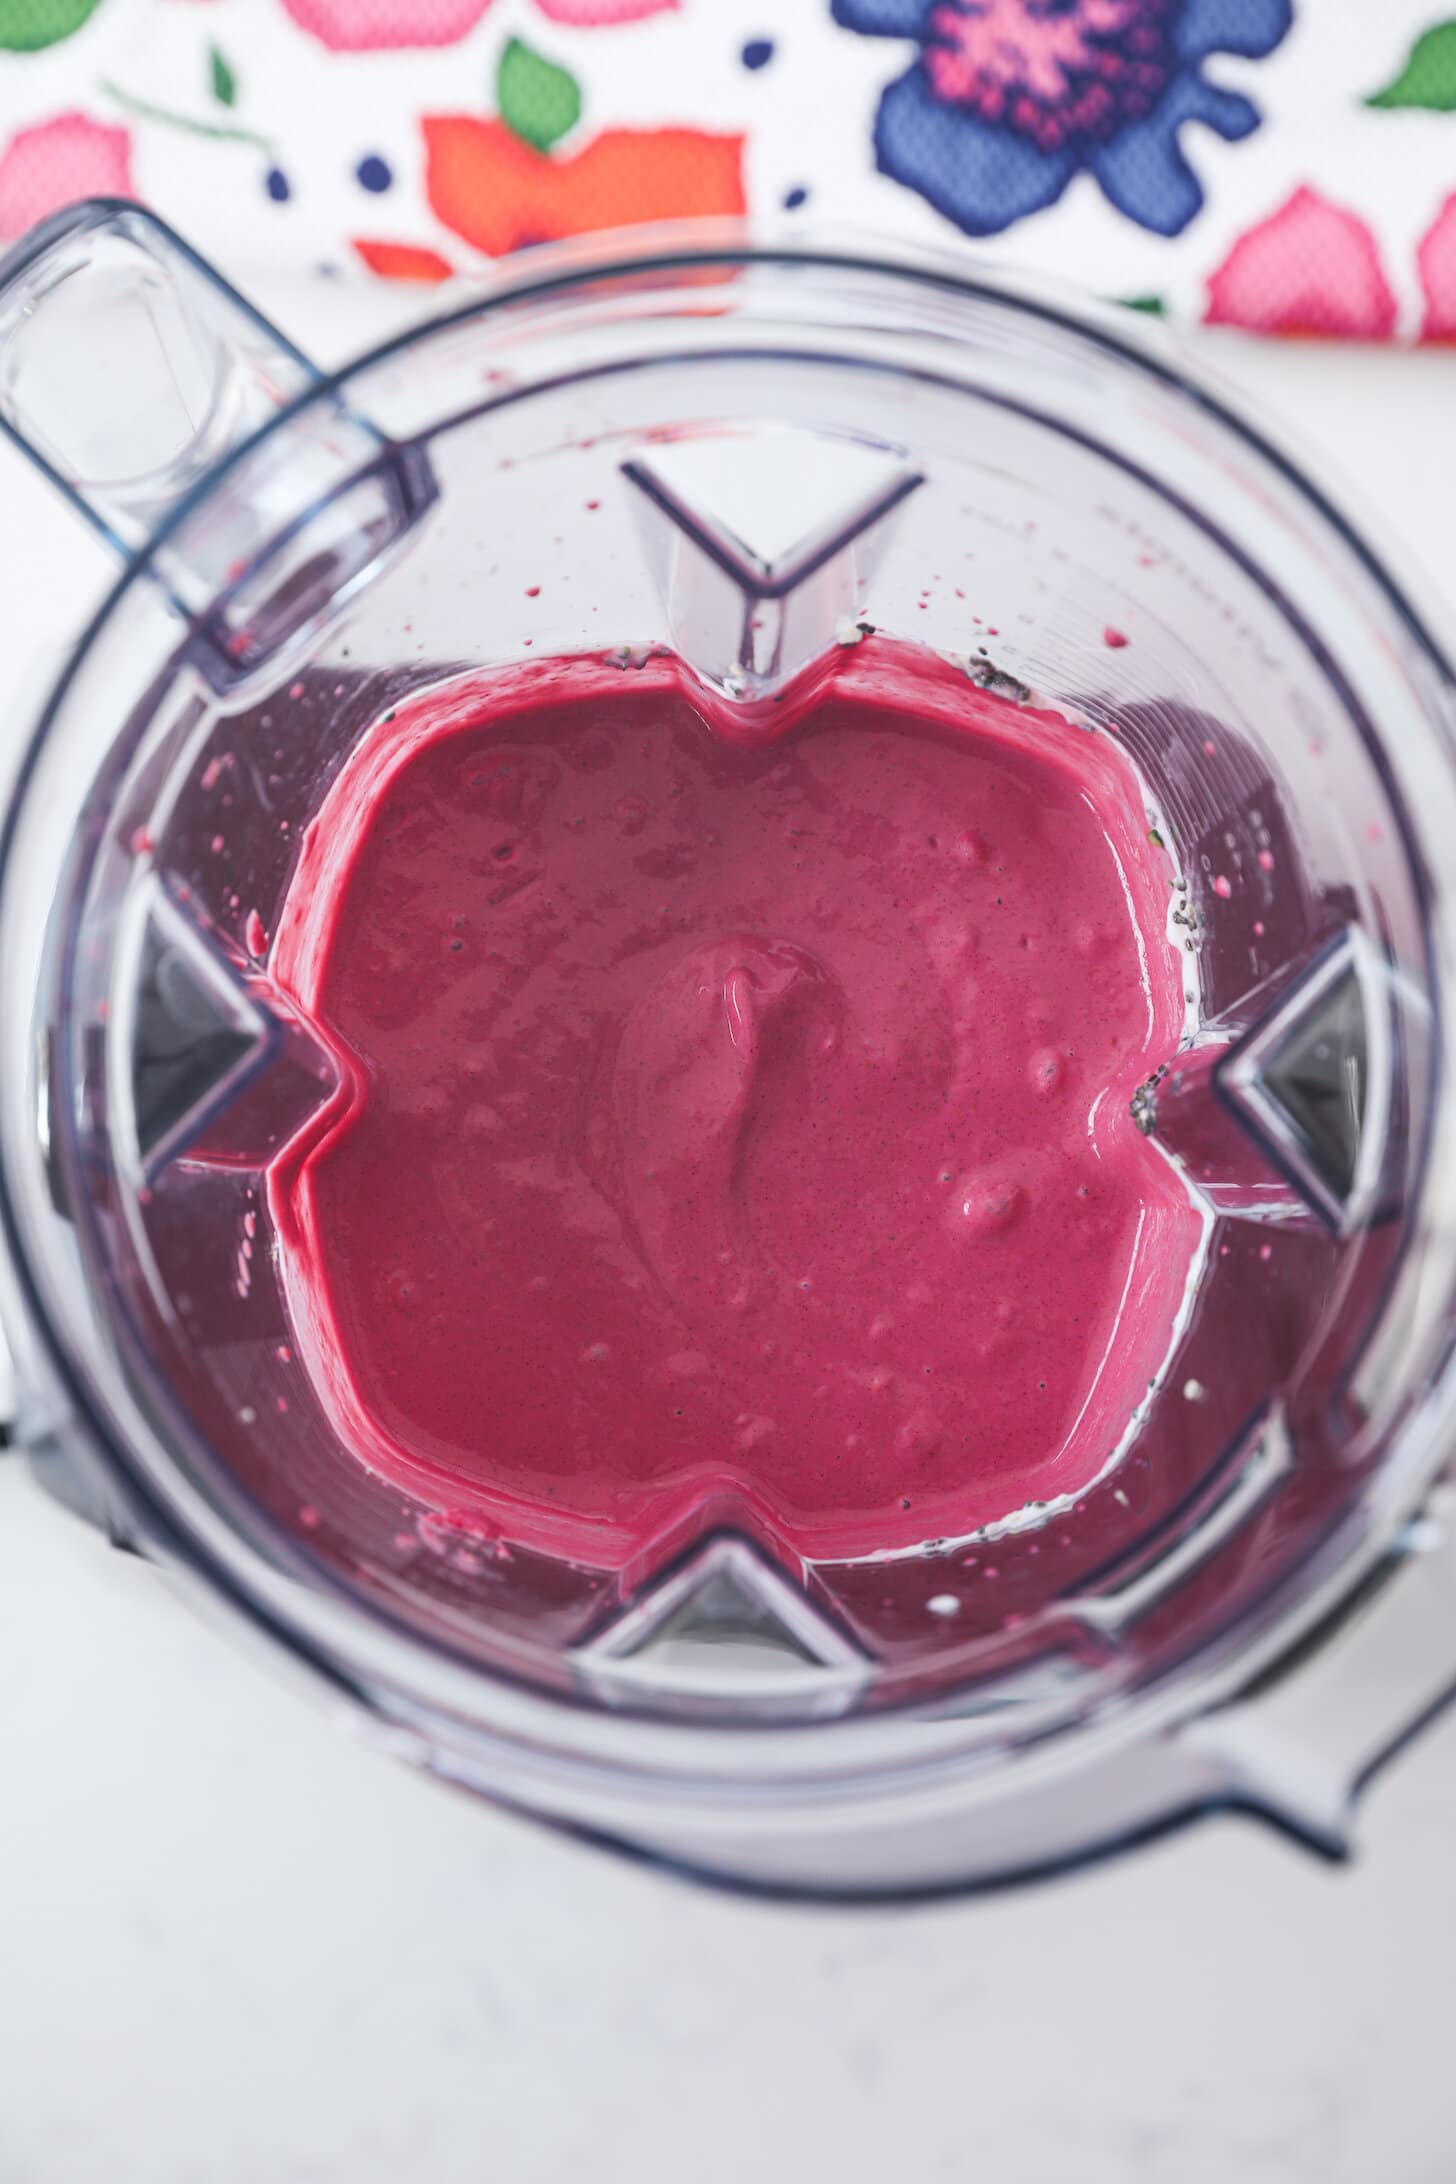 birds-eye view of a pink smoothie in a blender.